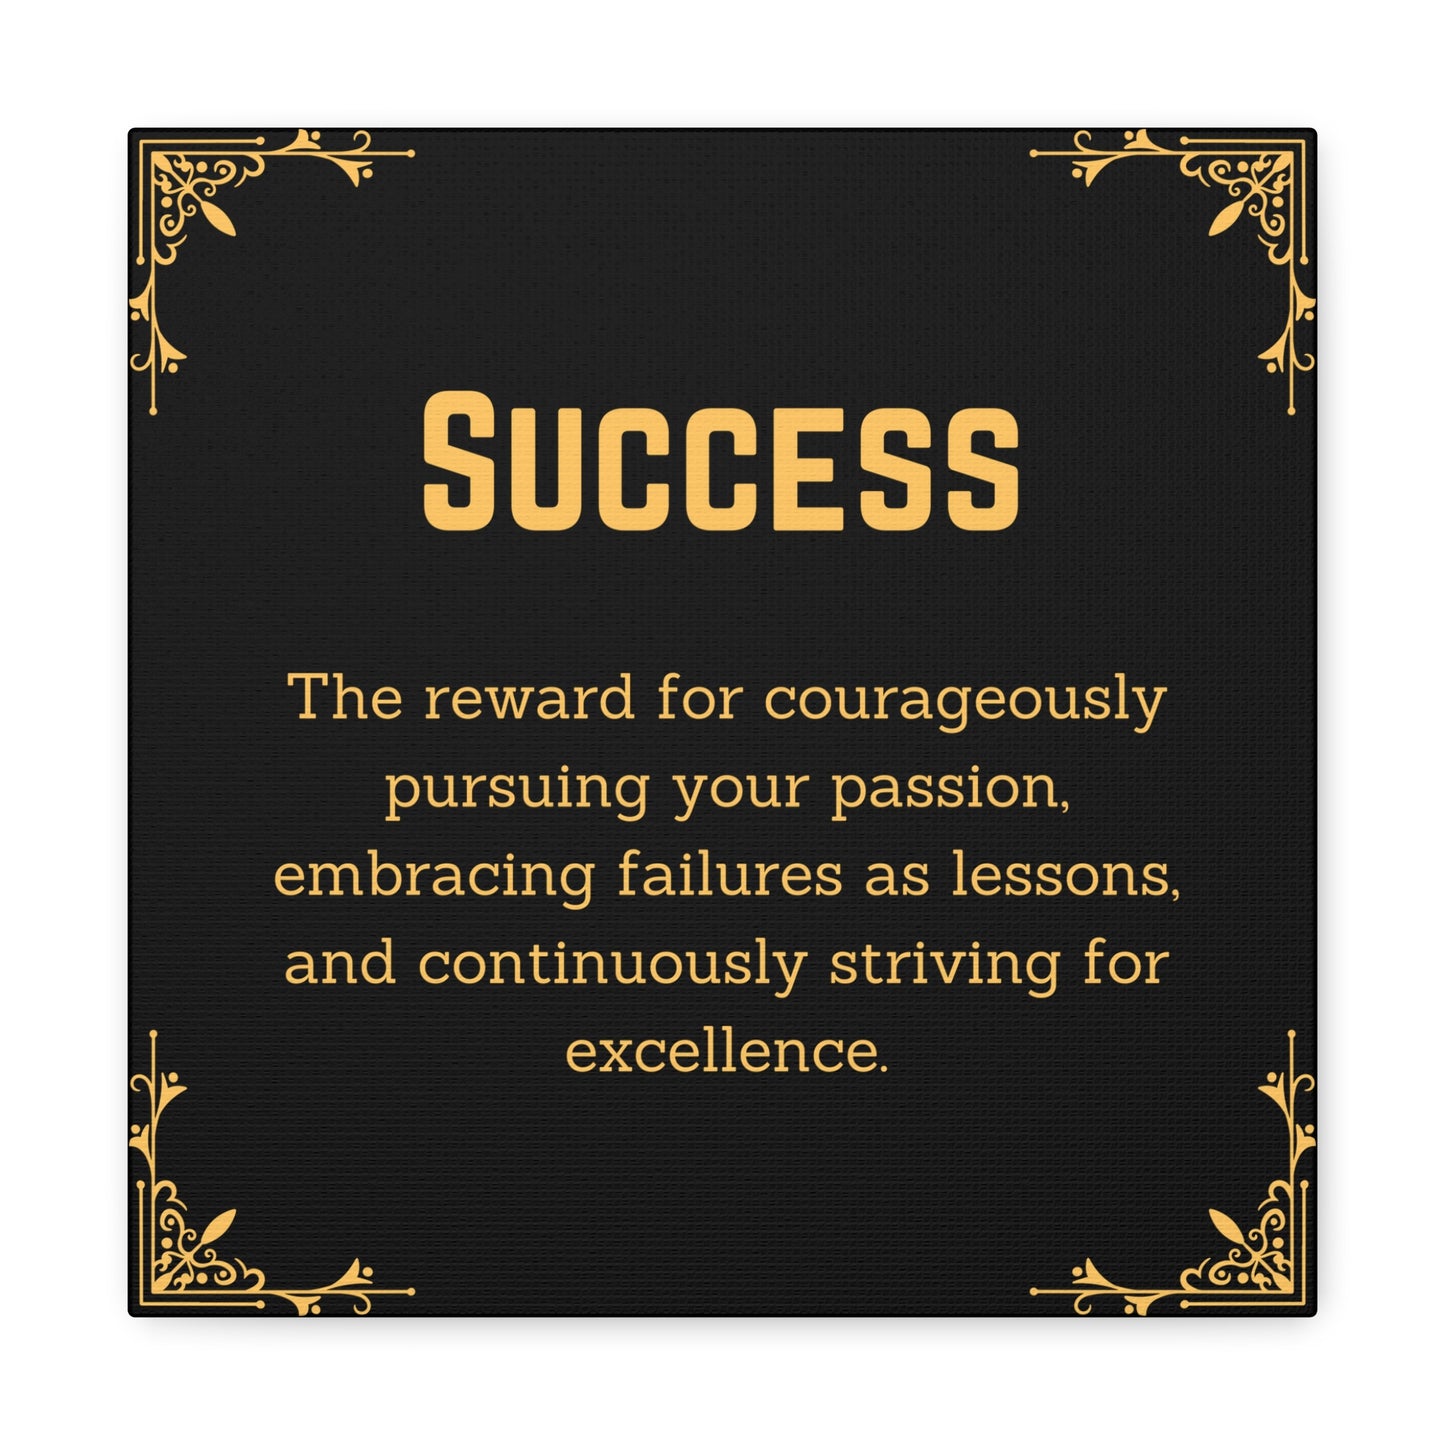 "Success" Wall Art - Weave Got Gifts - Unique Gifts You Won’t Find Anywhere Else!